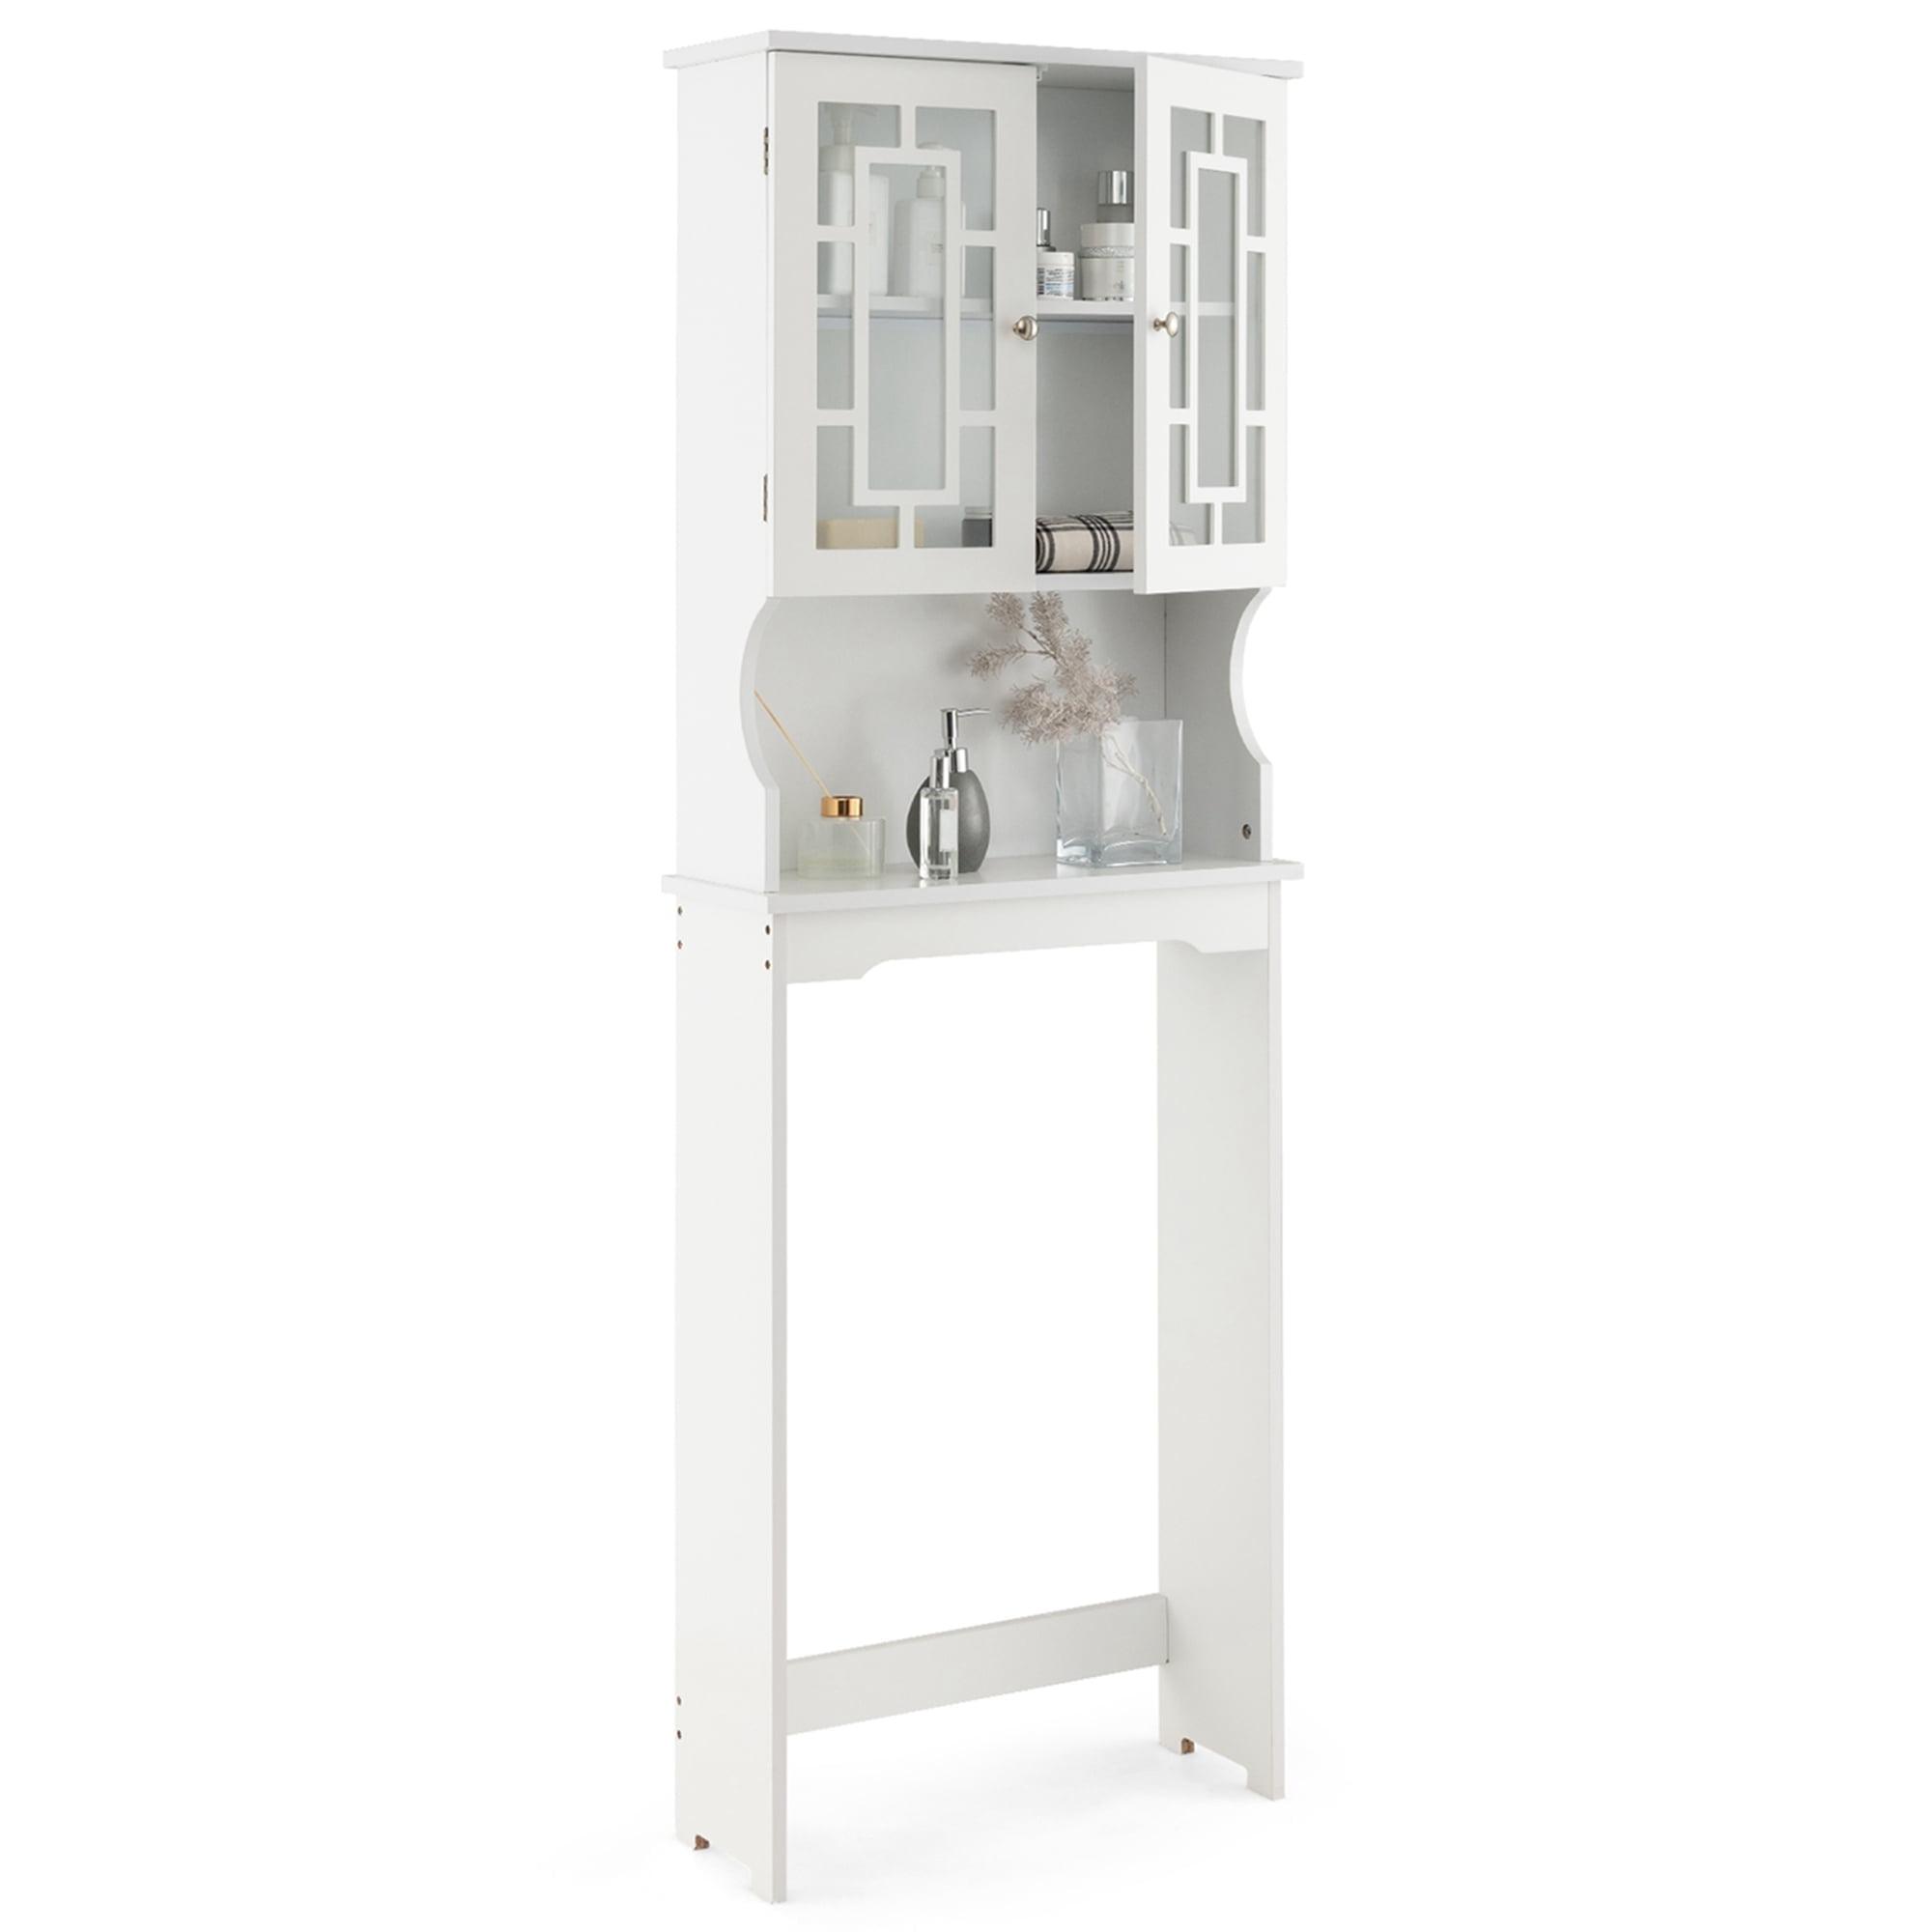 White Adjustable Over-the-Toilet Cabinet with Glass Doors